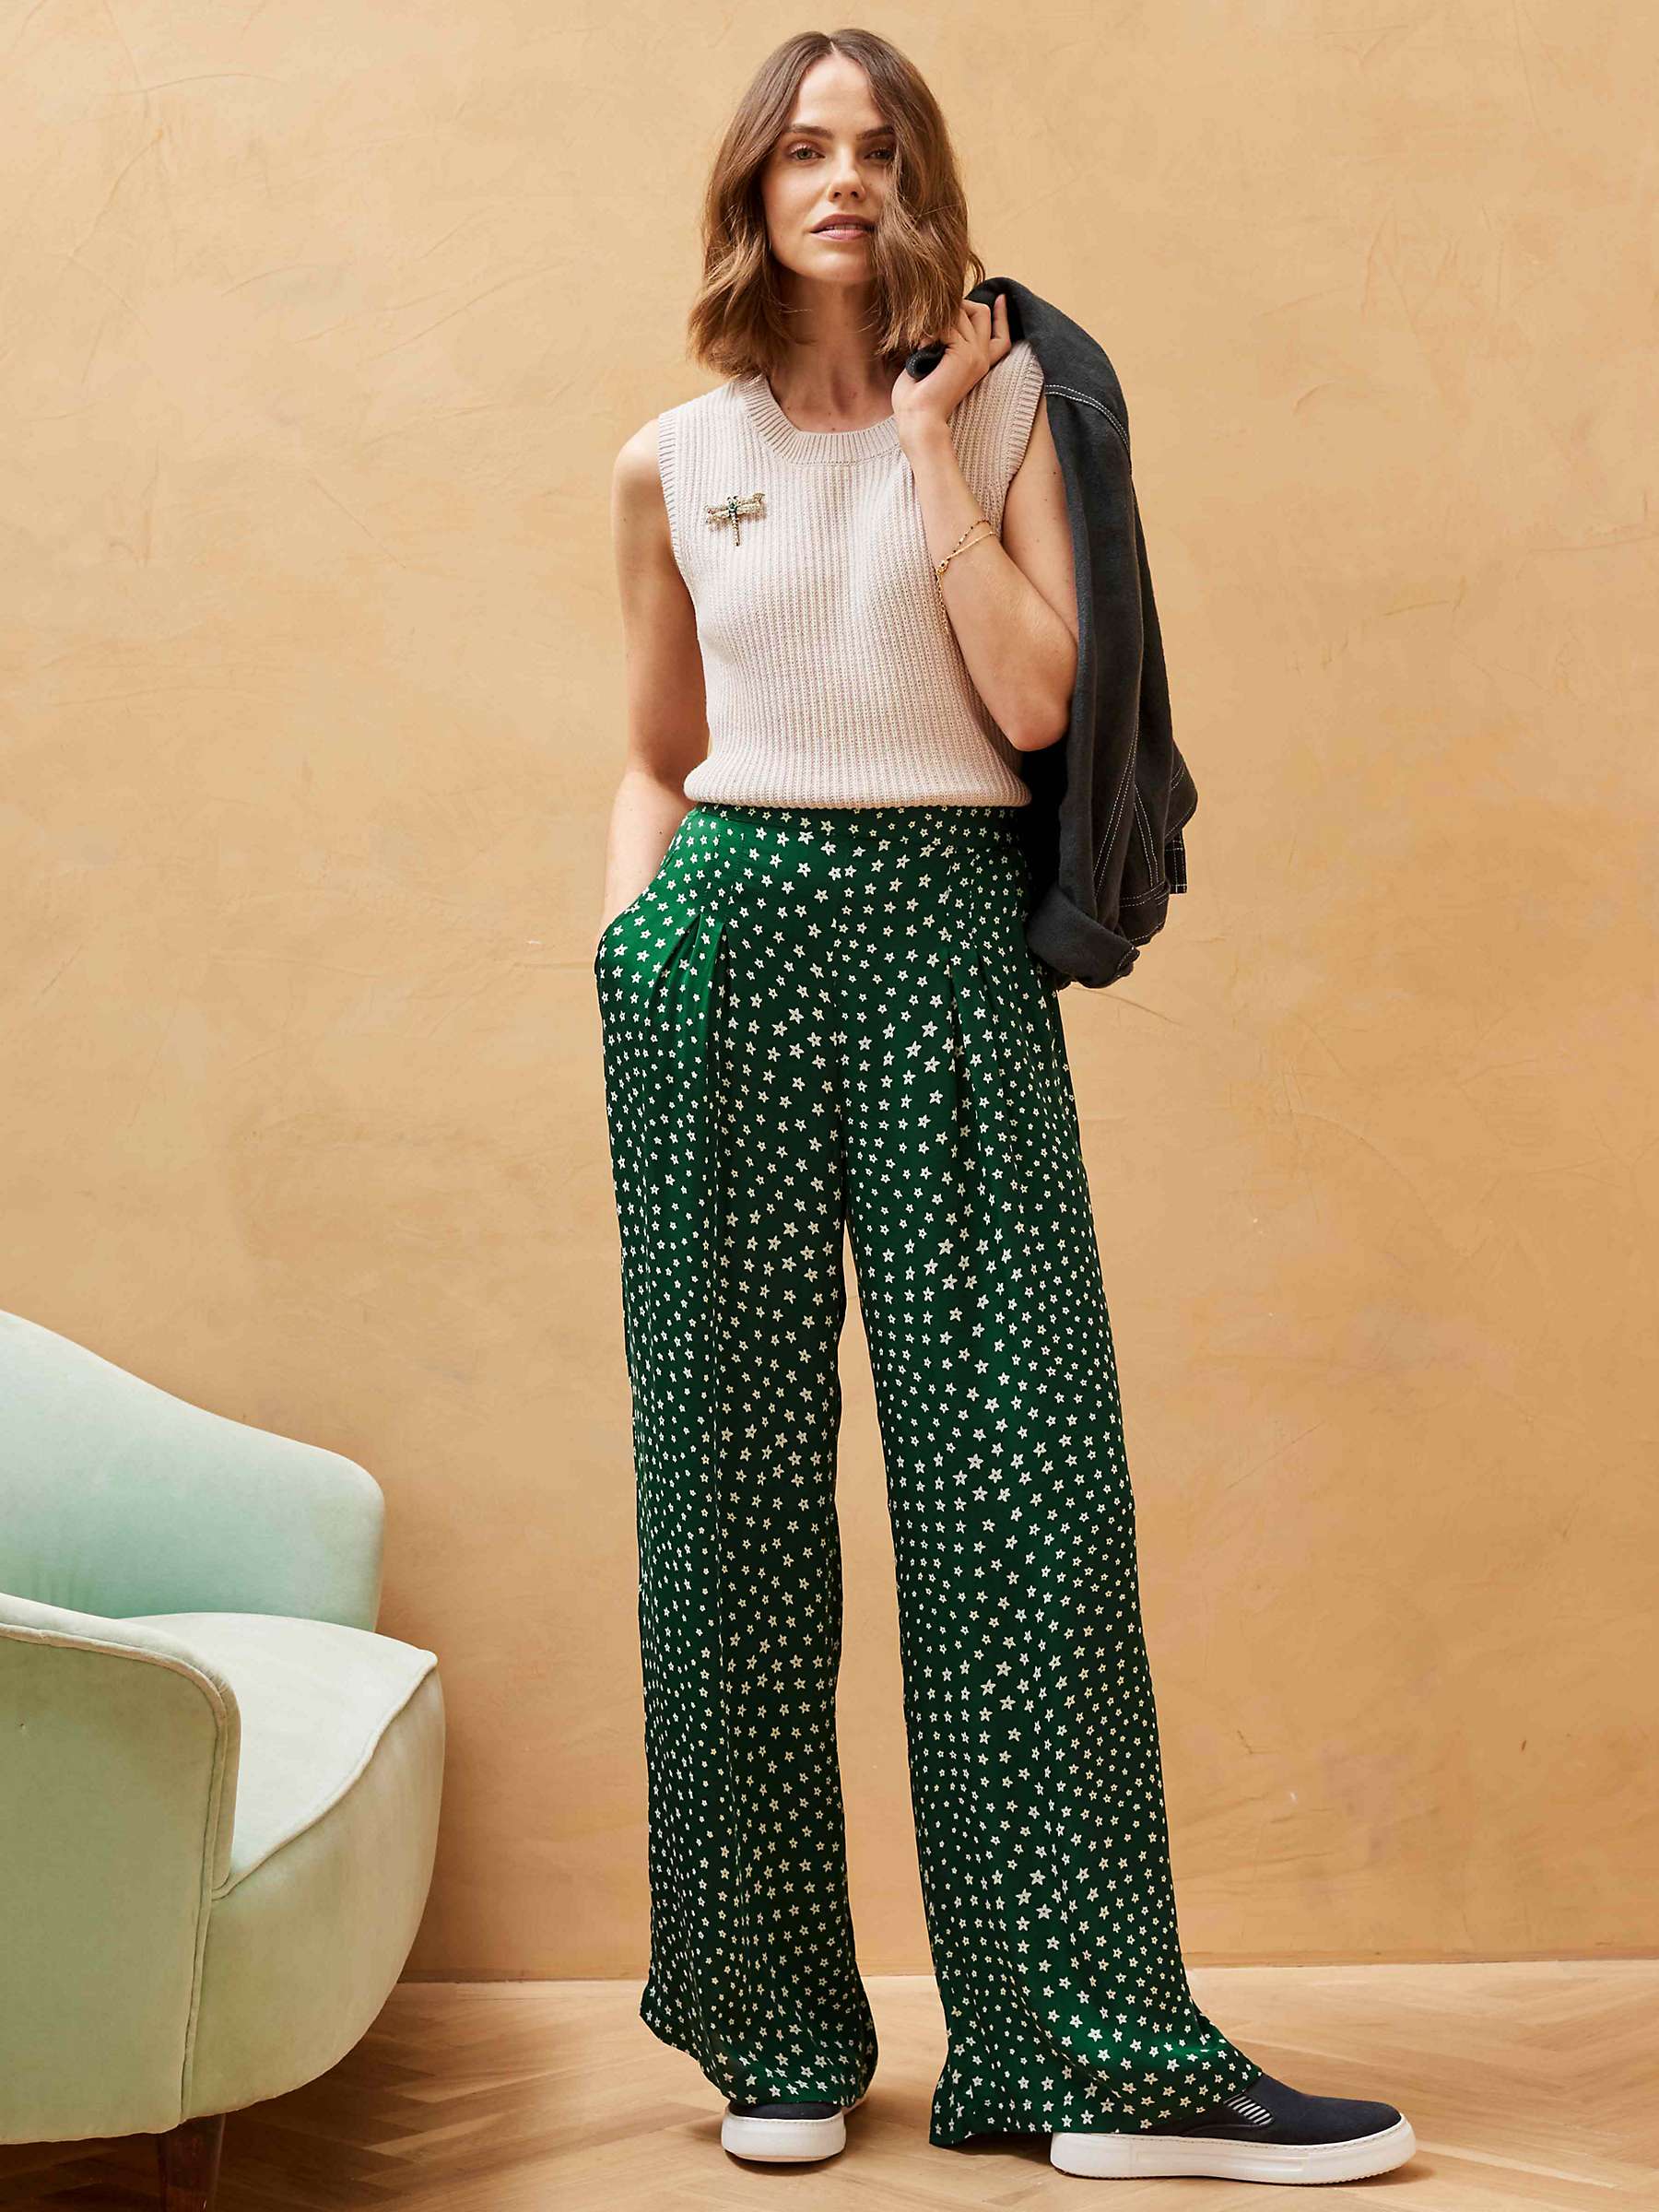 Buy Brora Star Print Palazzo Trousers, Spruce Online at johnlewis.com